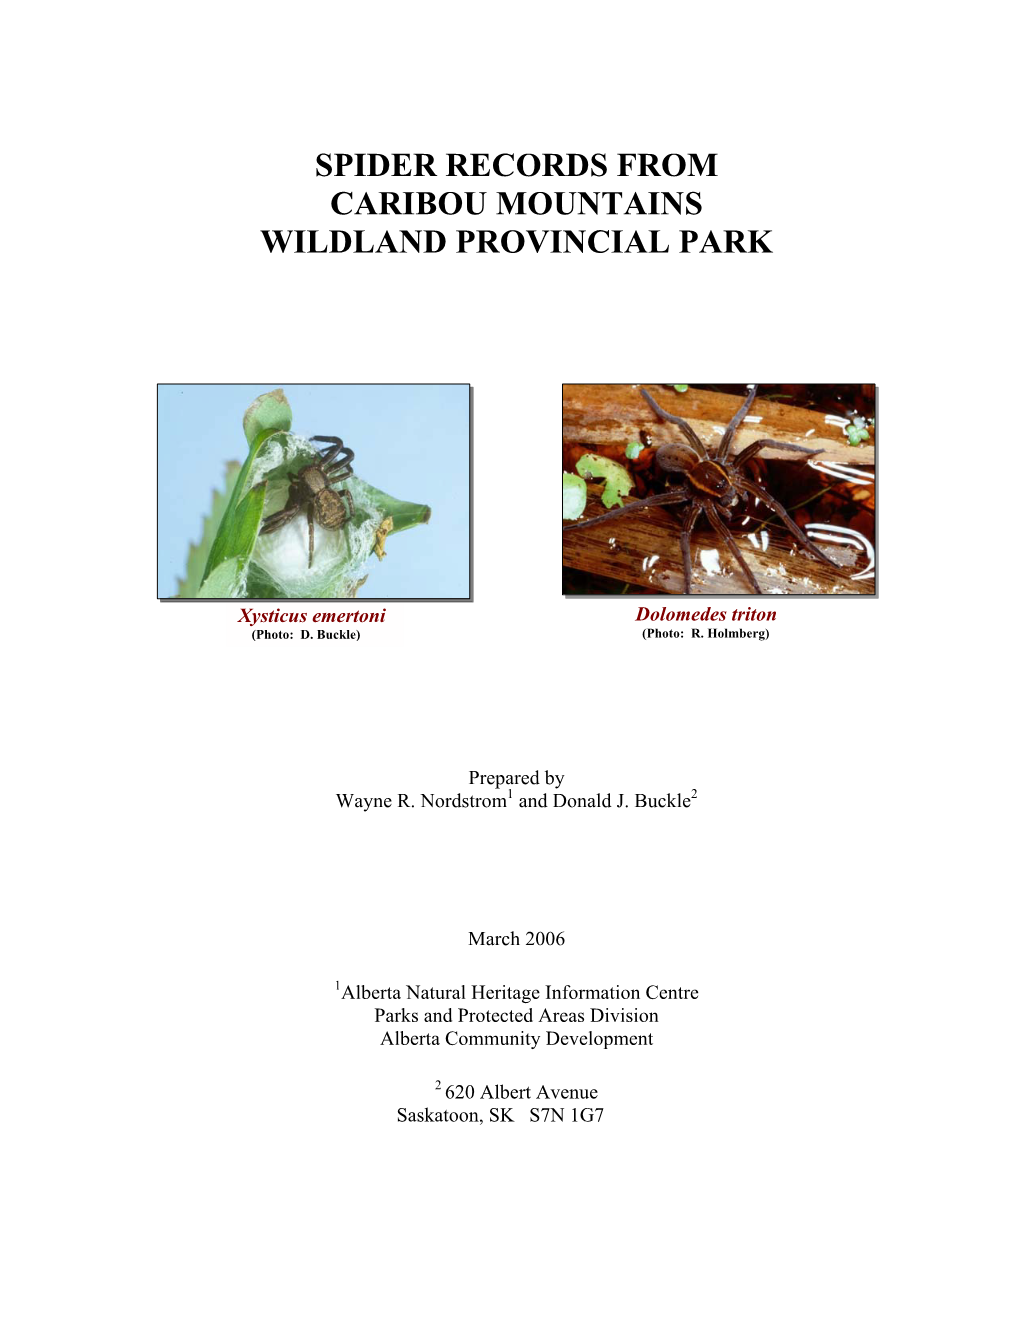 Spider Records from Caribou Mountains Wildland Provincial Park